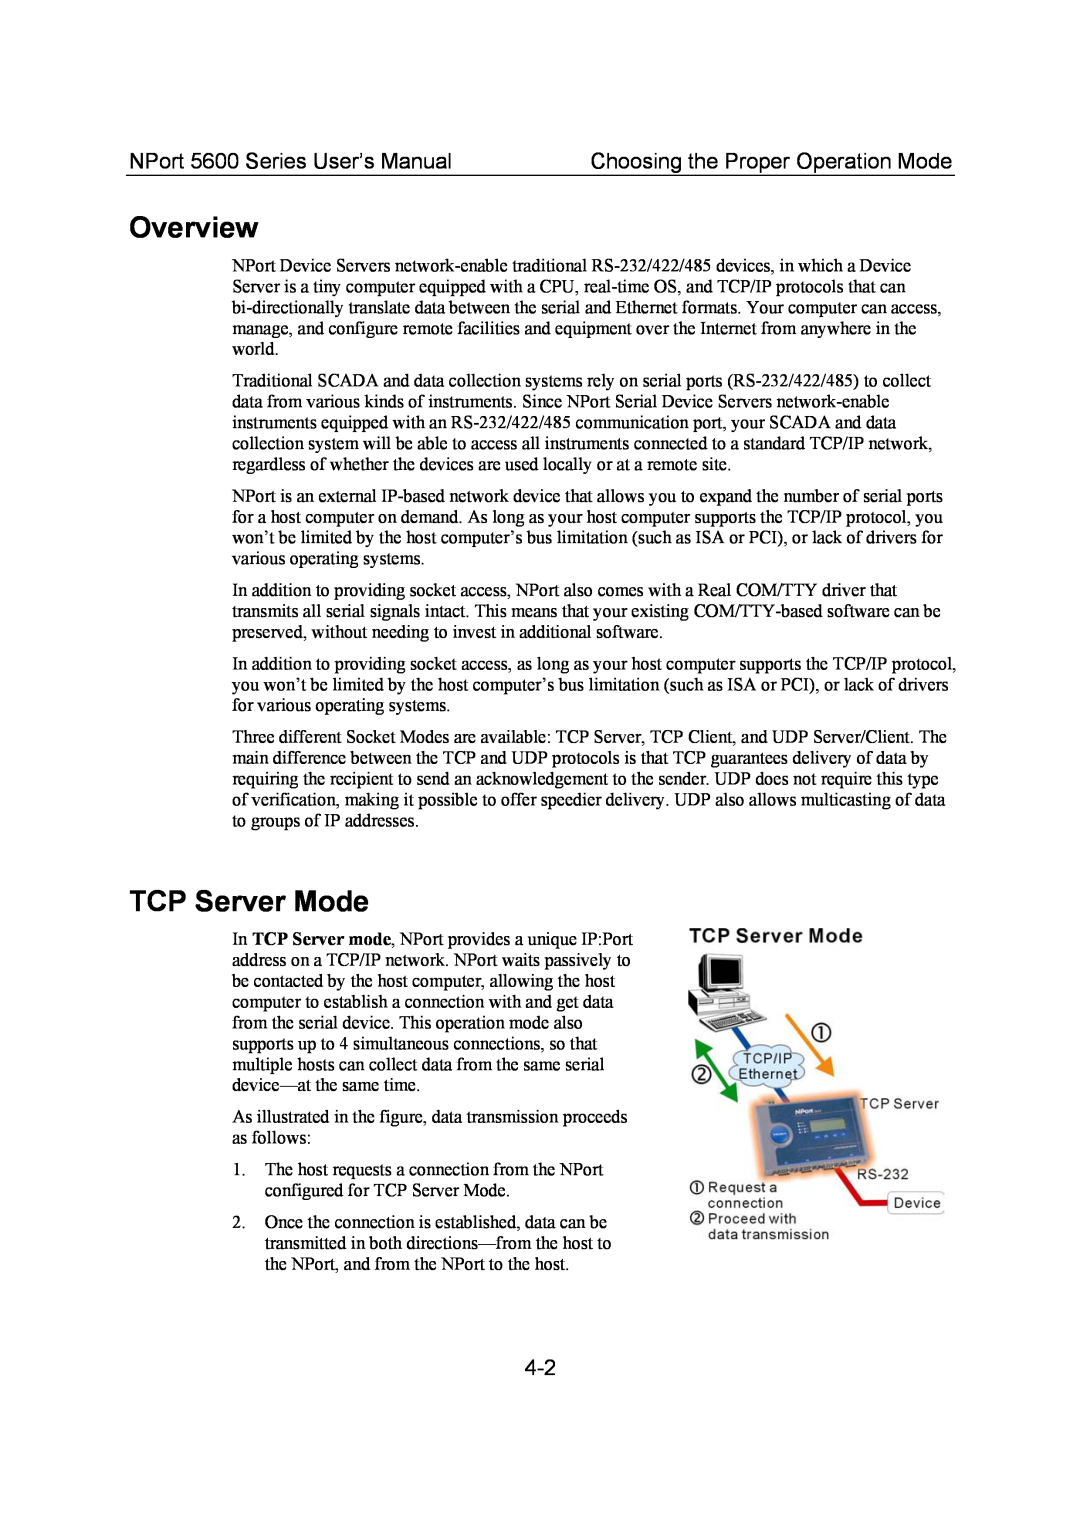 Moxa Technologies TCP Server Mode, Choosing the Proper Operation Mode, Overview, NPort 5600 Series User’s Manual 